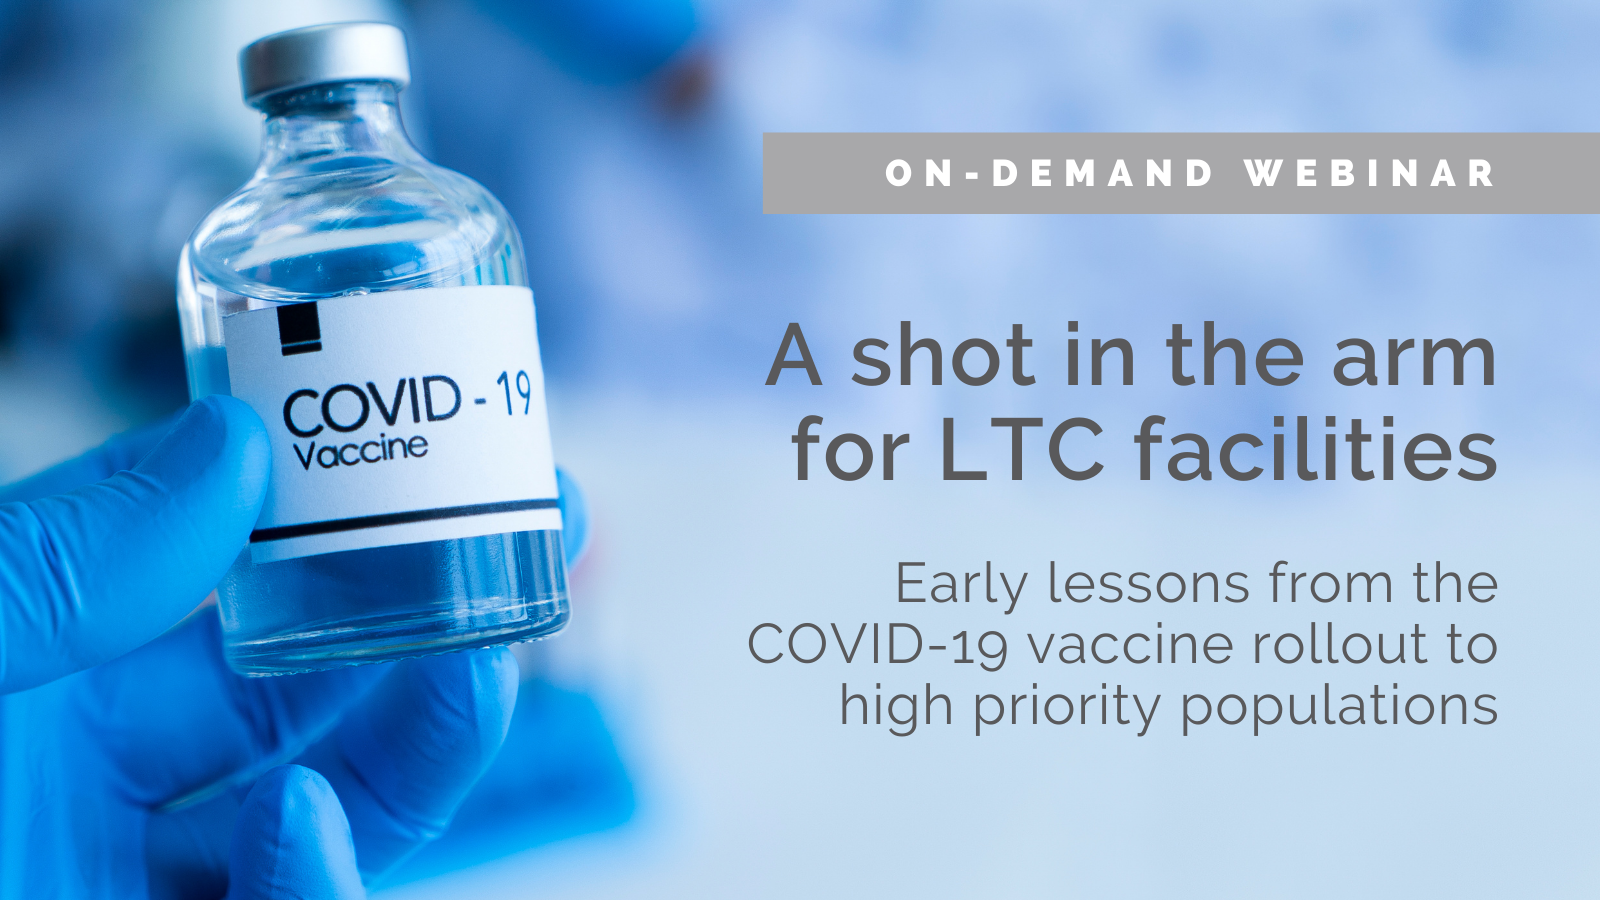 Featured image for “A shot in the arm for LTC facilities – webinar recording and slides available”